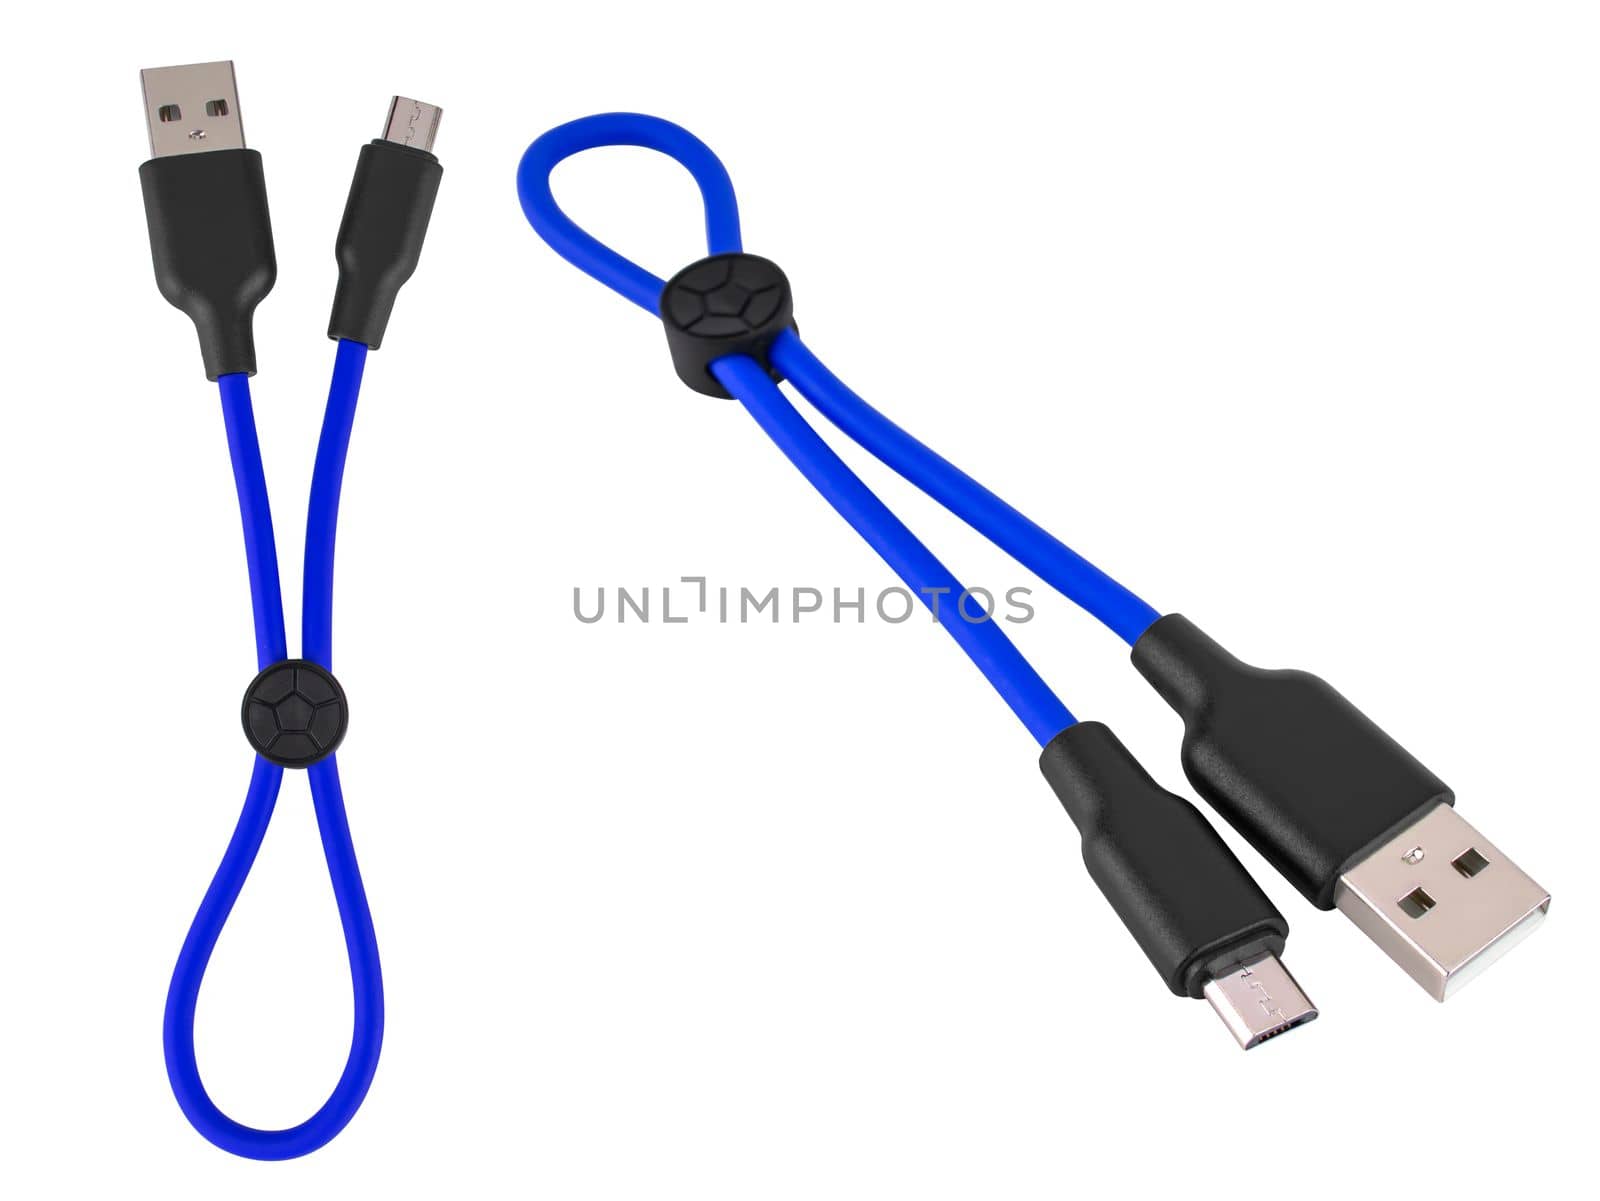 cable with USB connector, micro USB on a white background in isolation